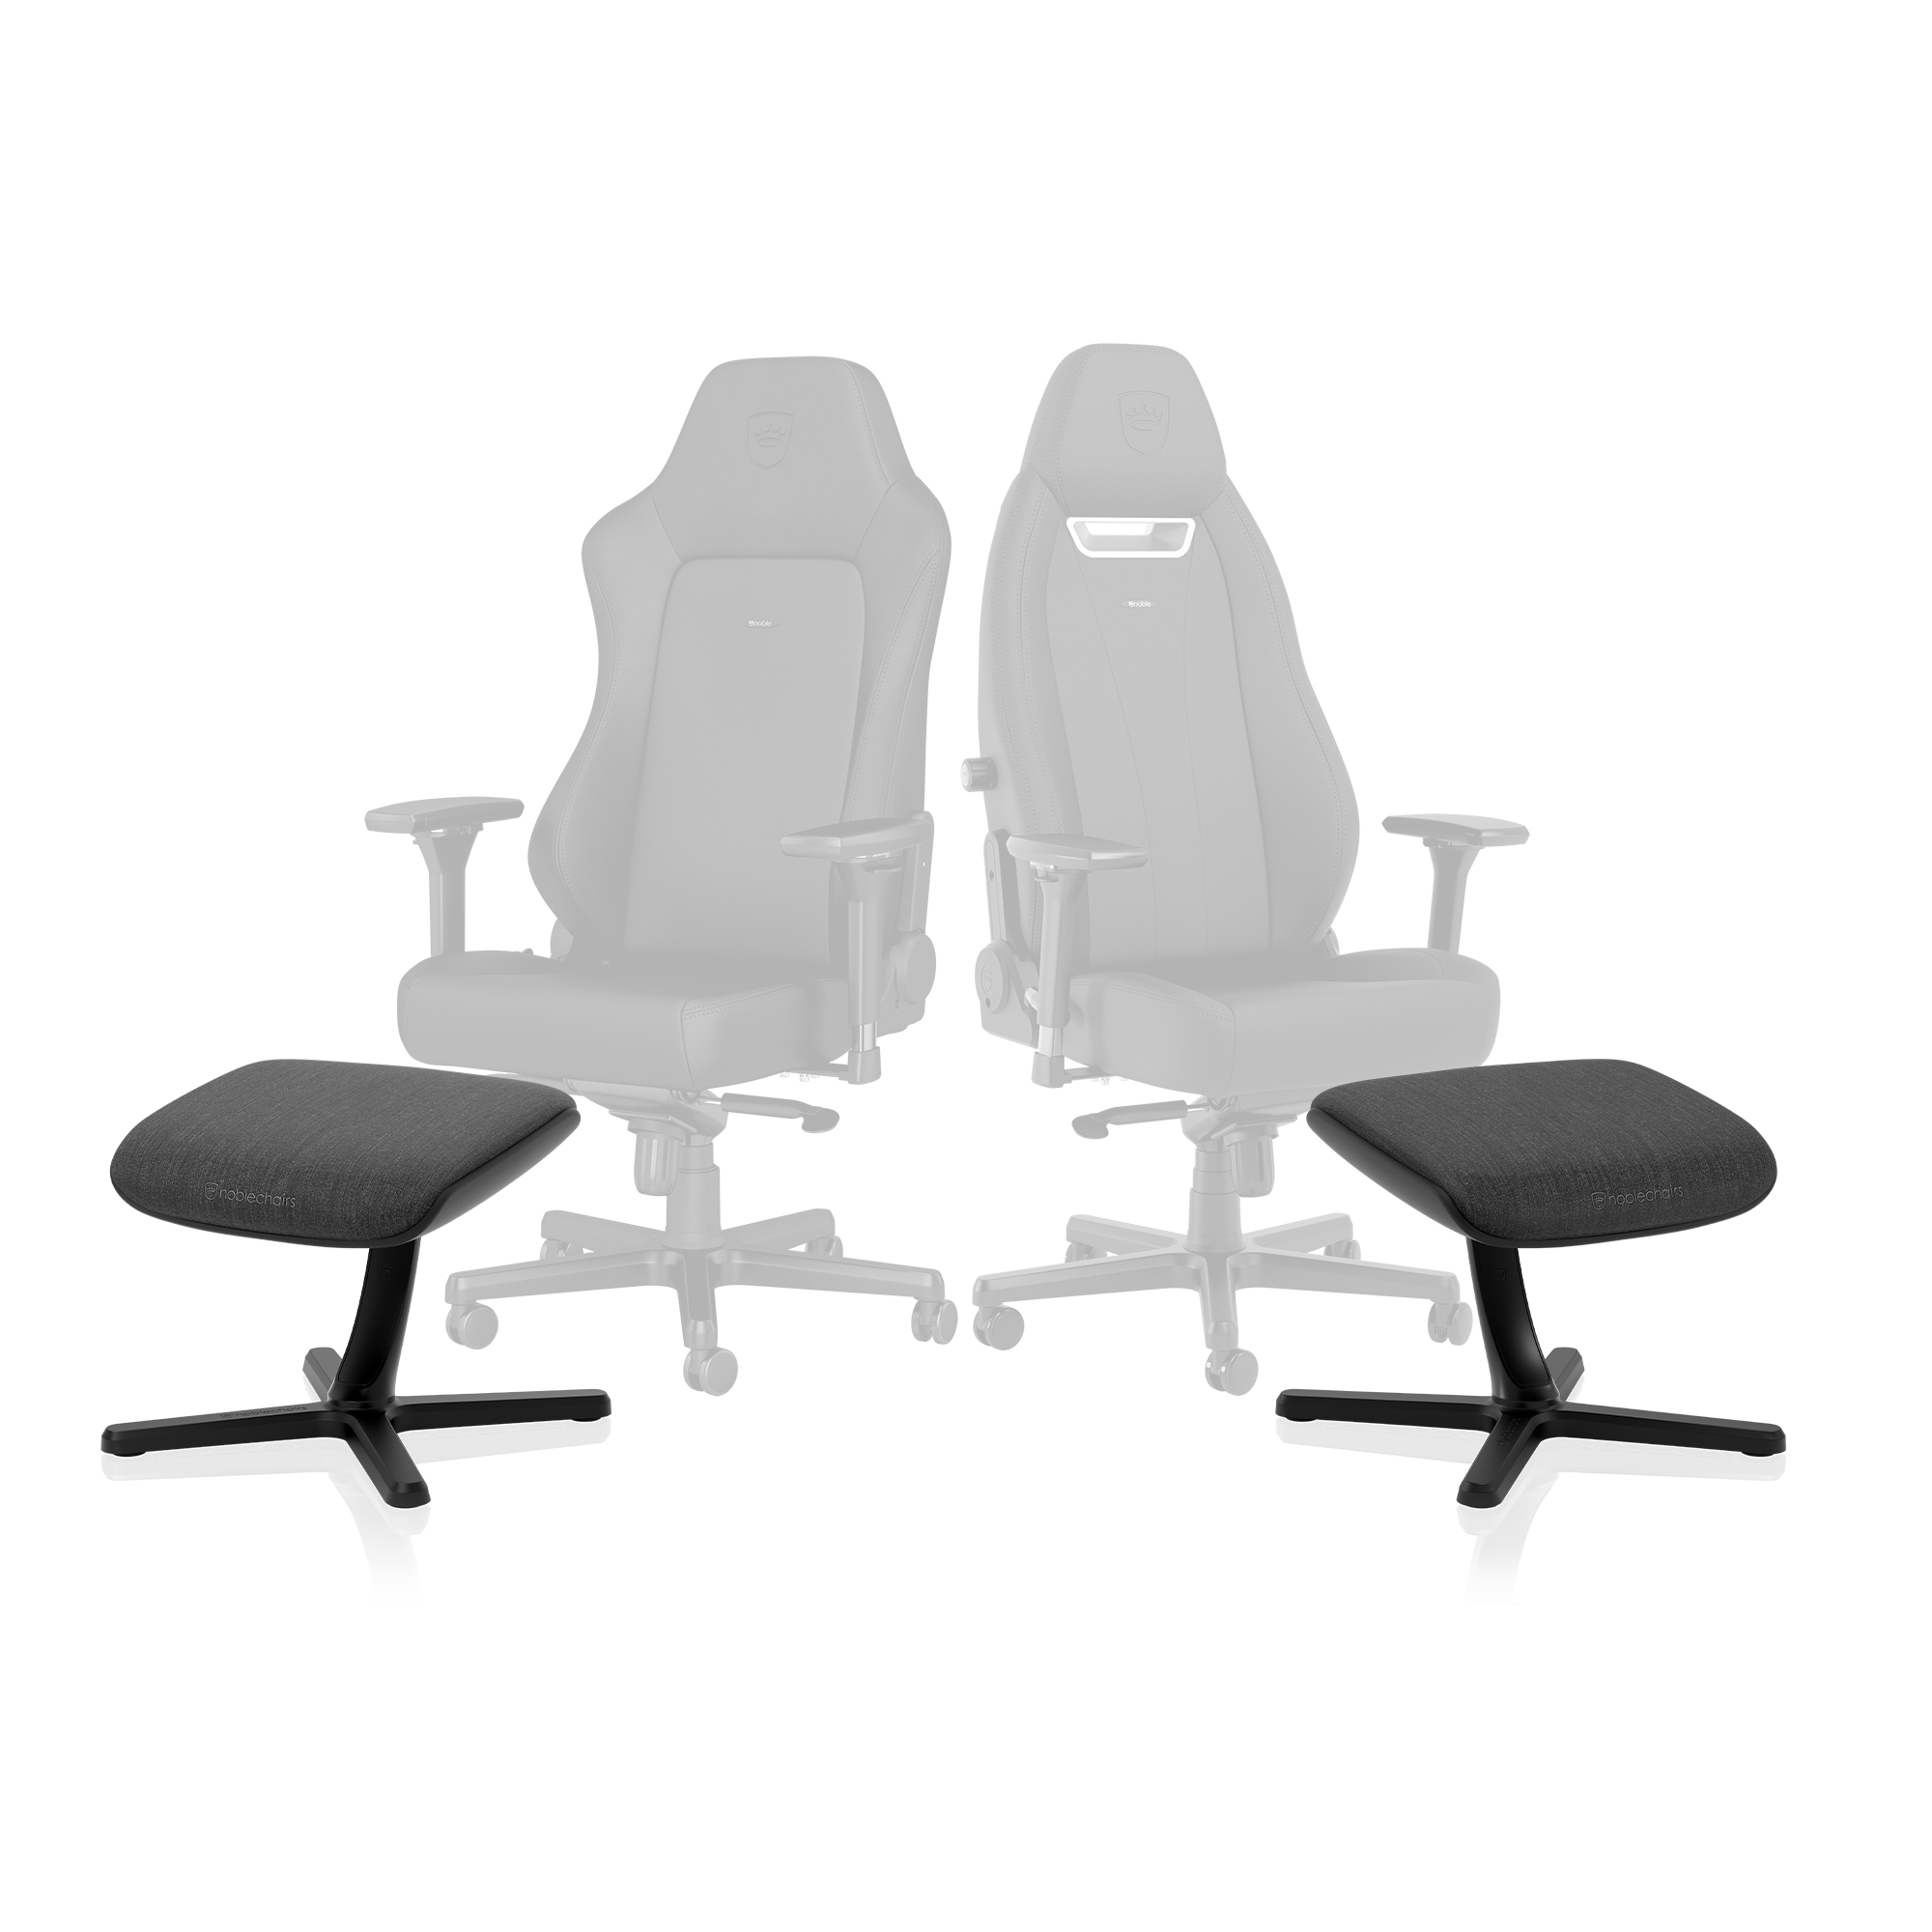 noblechairs - noblechairs Footrest 2 TX Edition Anthracite Grey